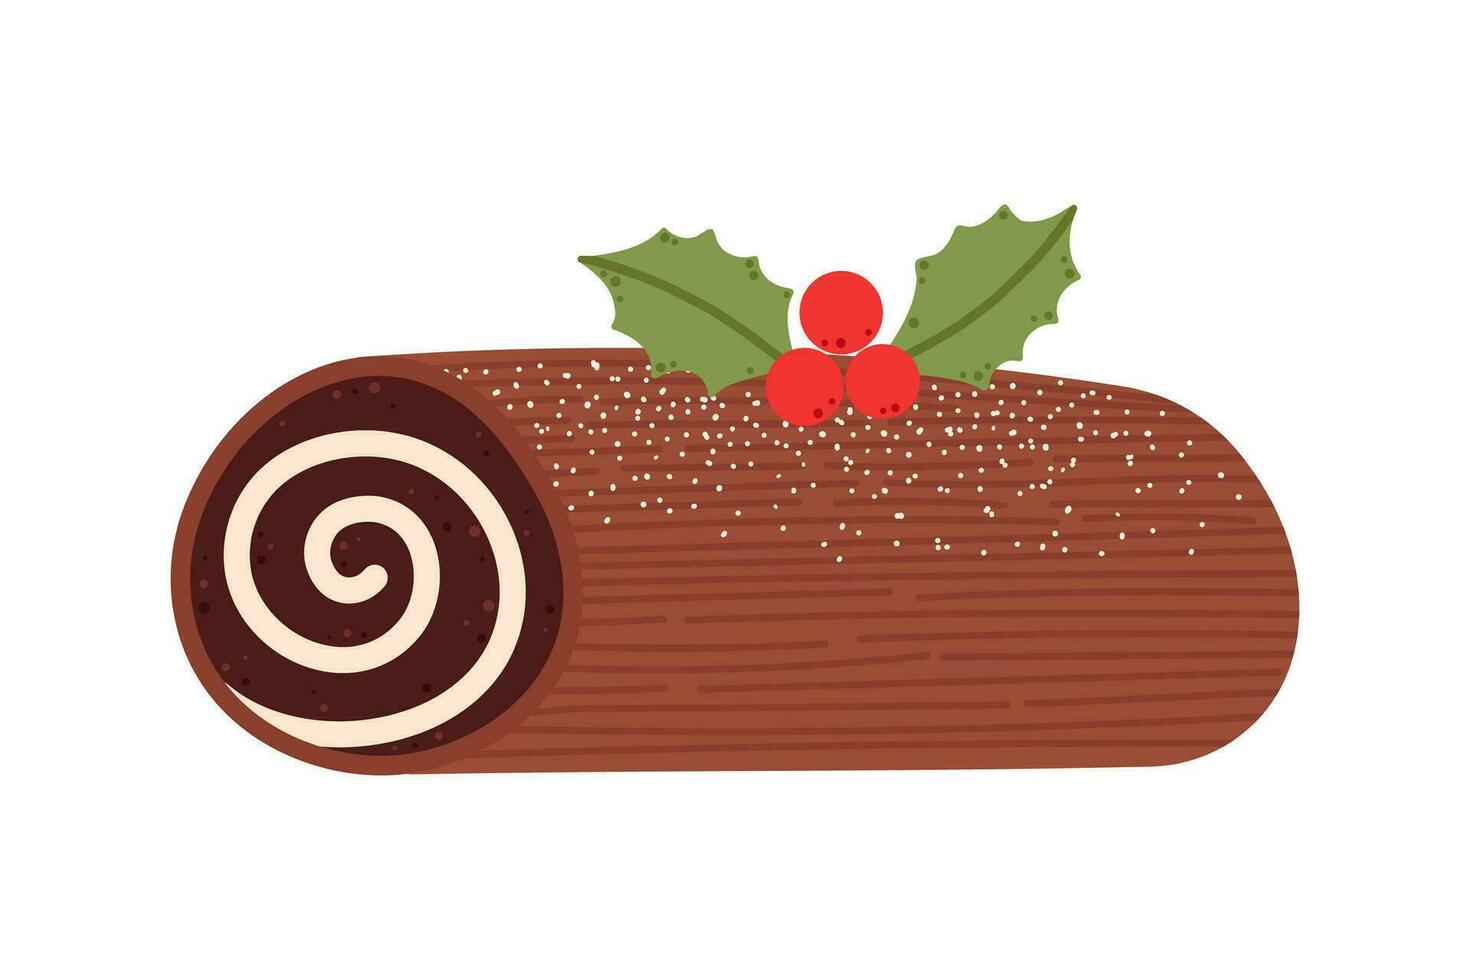 Yule log traditional Christmas cake with holly ordinary plant decoration. Buche de noel dessert. Chocolate roll with cream vector